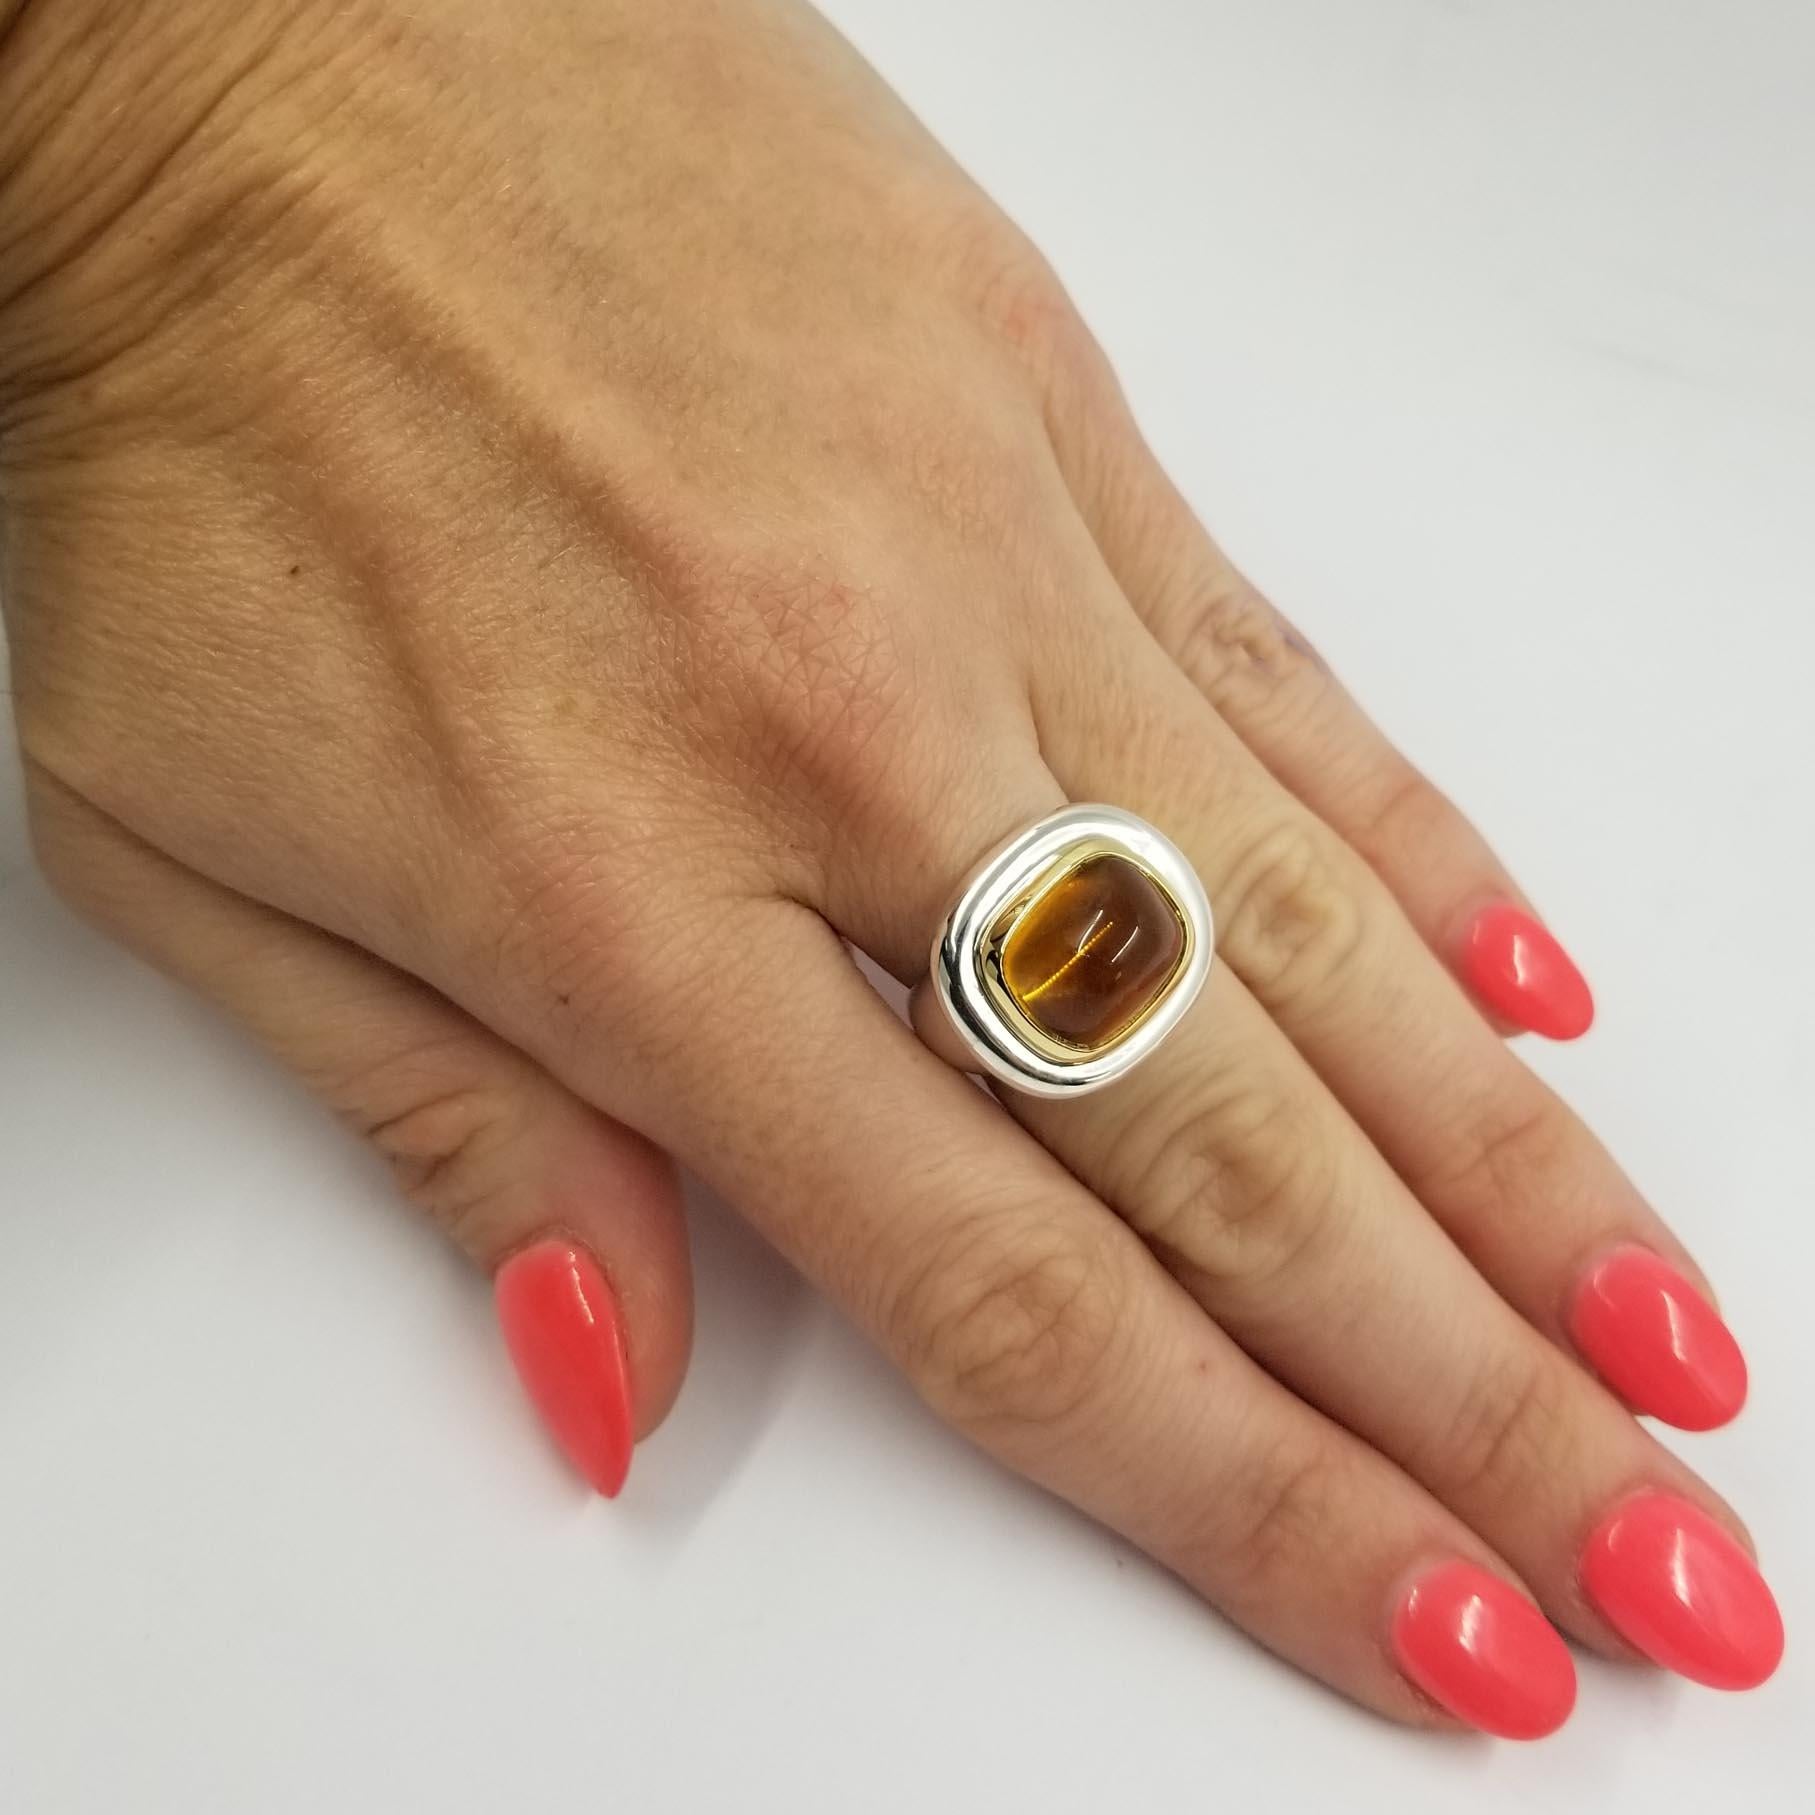 Tiffany & Co. by Paloma Picasso Citrine Cabochon Cocktail Ring 1